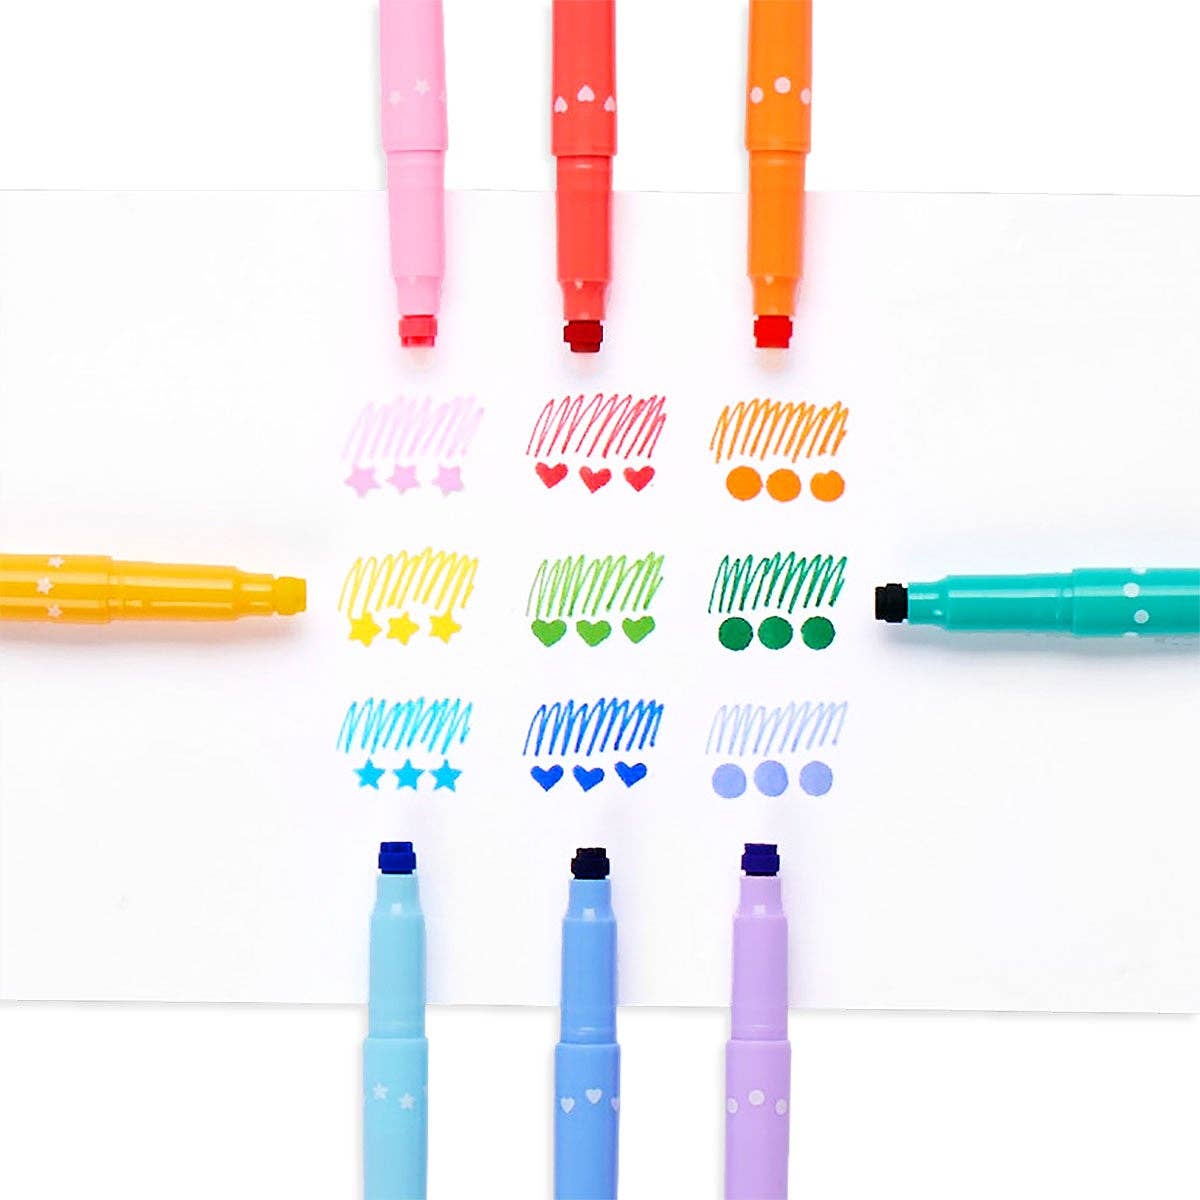 Confetti Stamp Double-Ended Markers | Set of 9